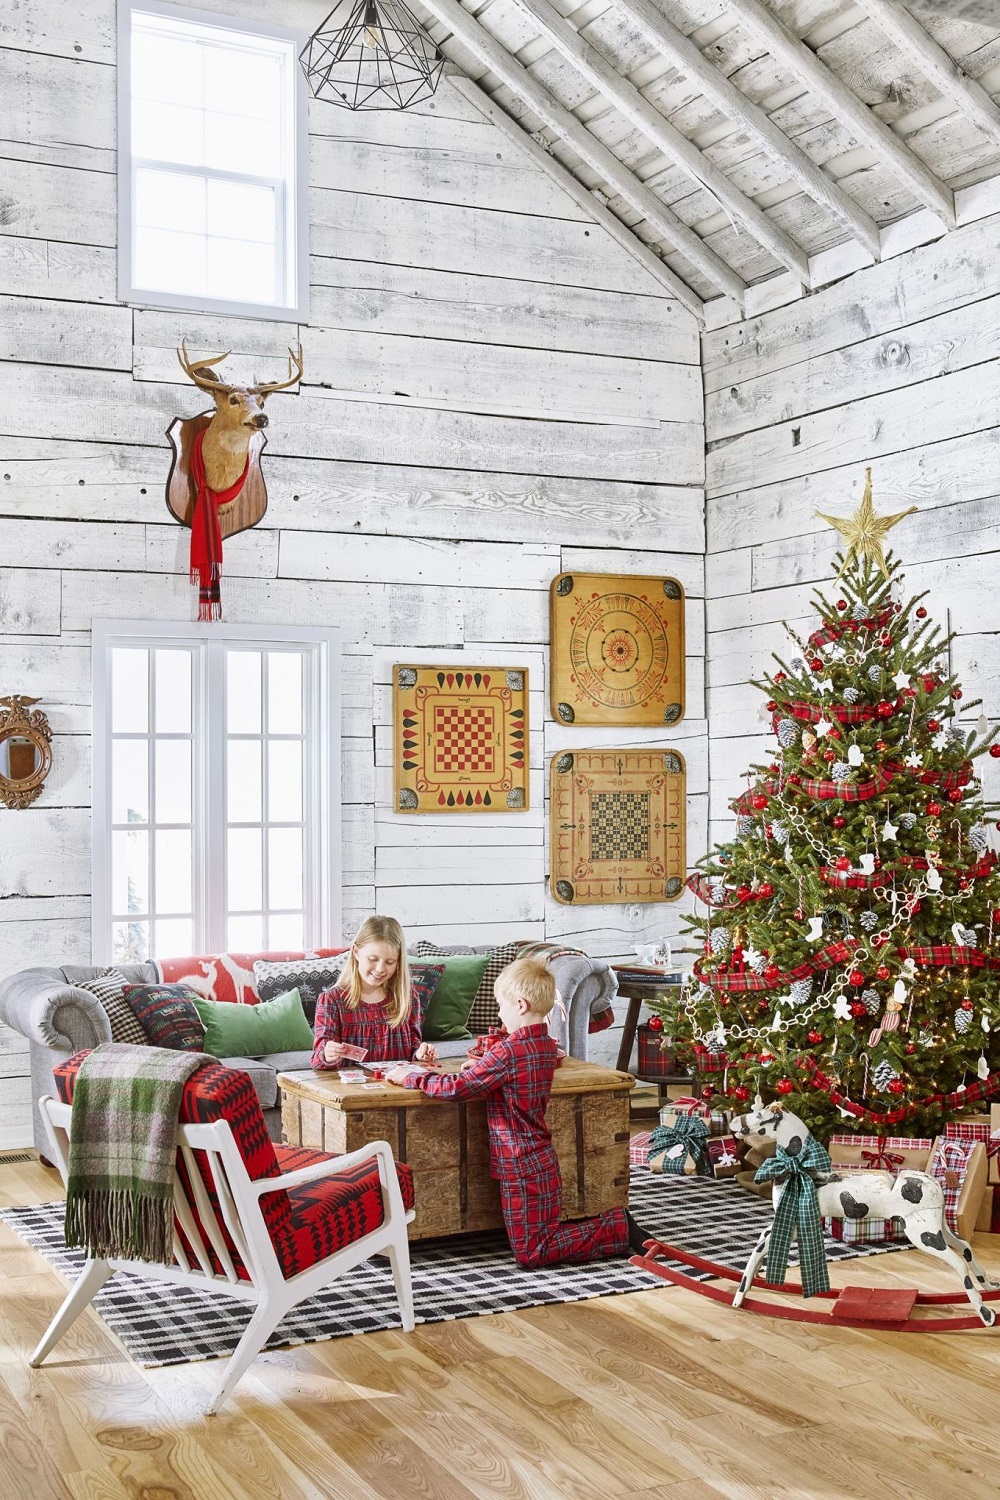 t3-141 Christmas living room decorations you must try in the holiday season